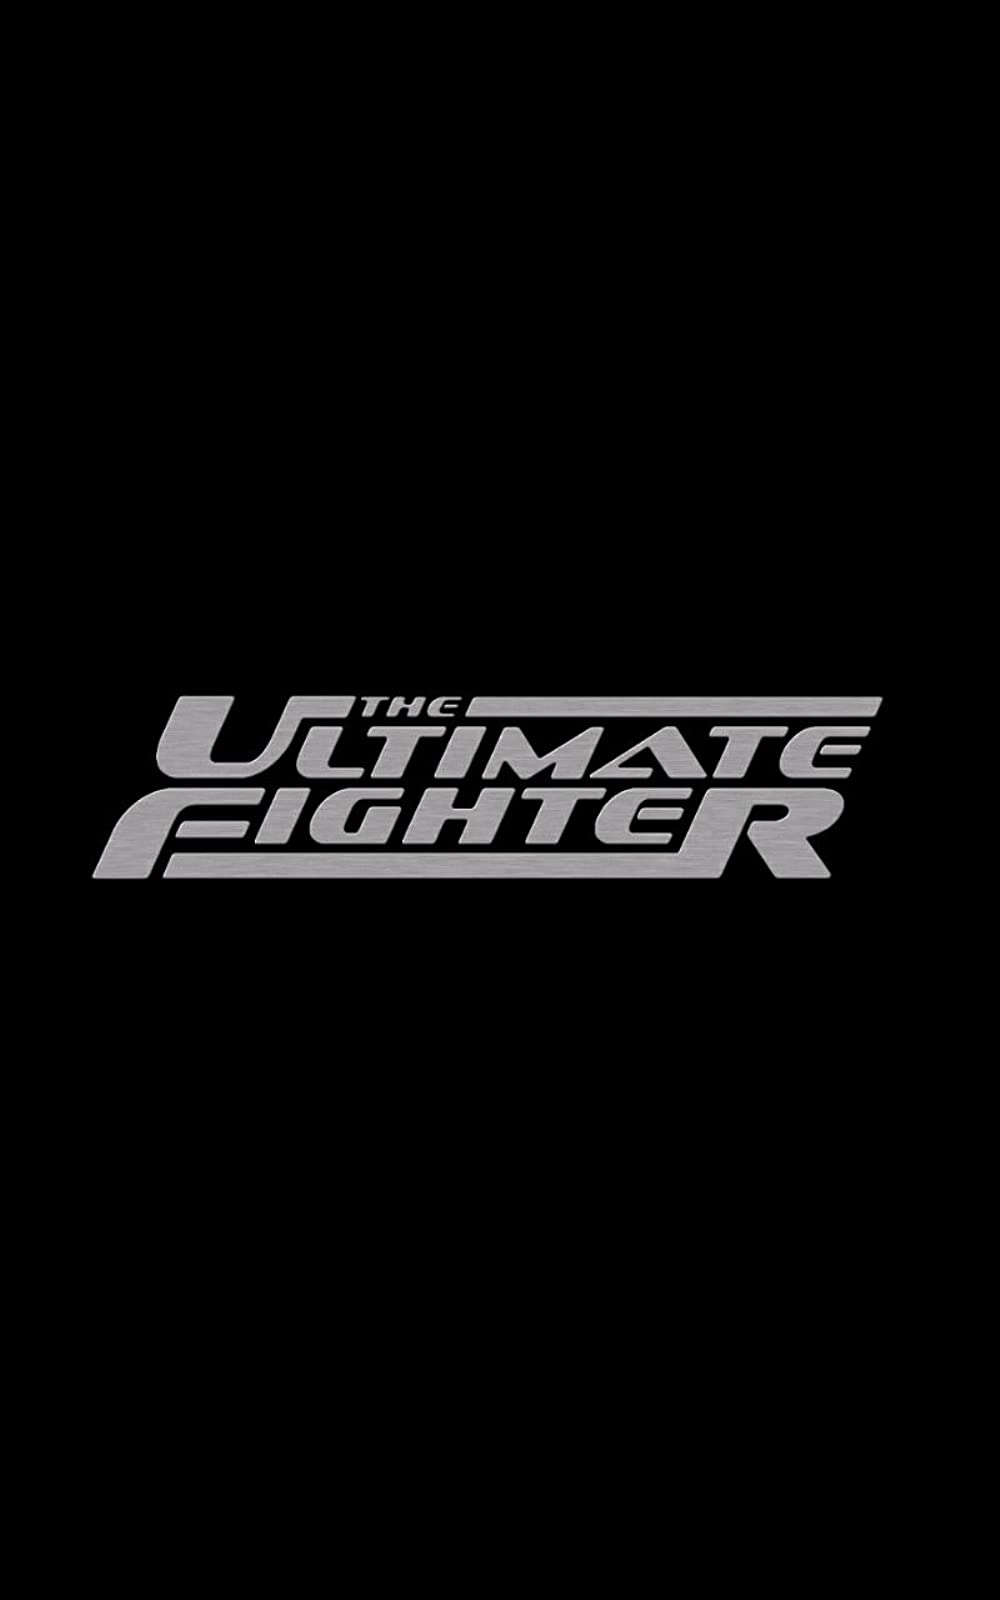 The Ultimate Fighter: Popular Reality TV Show